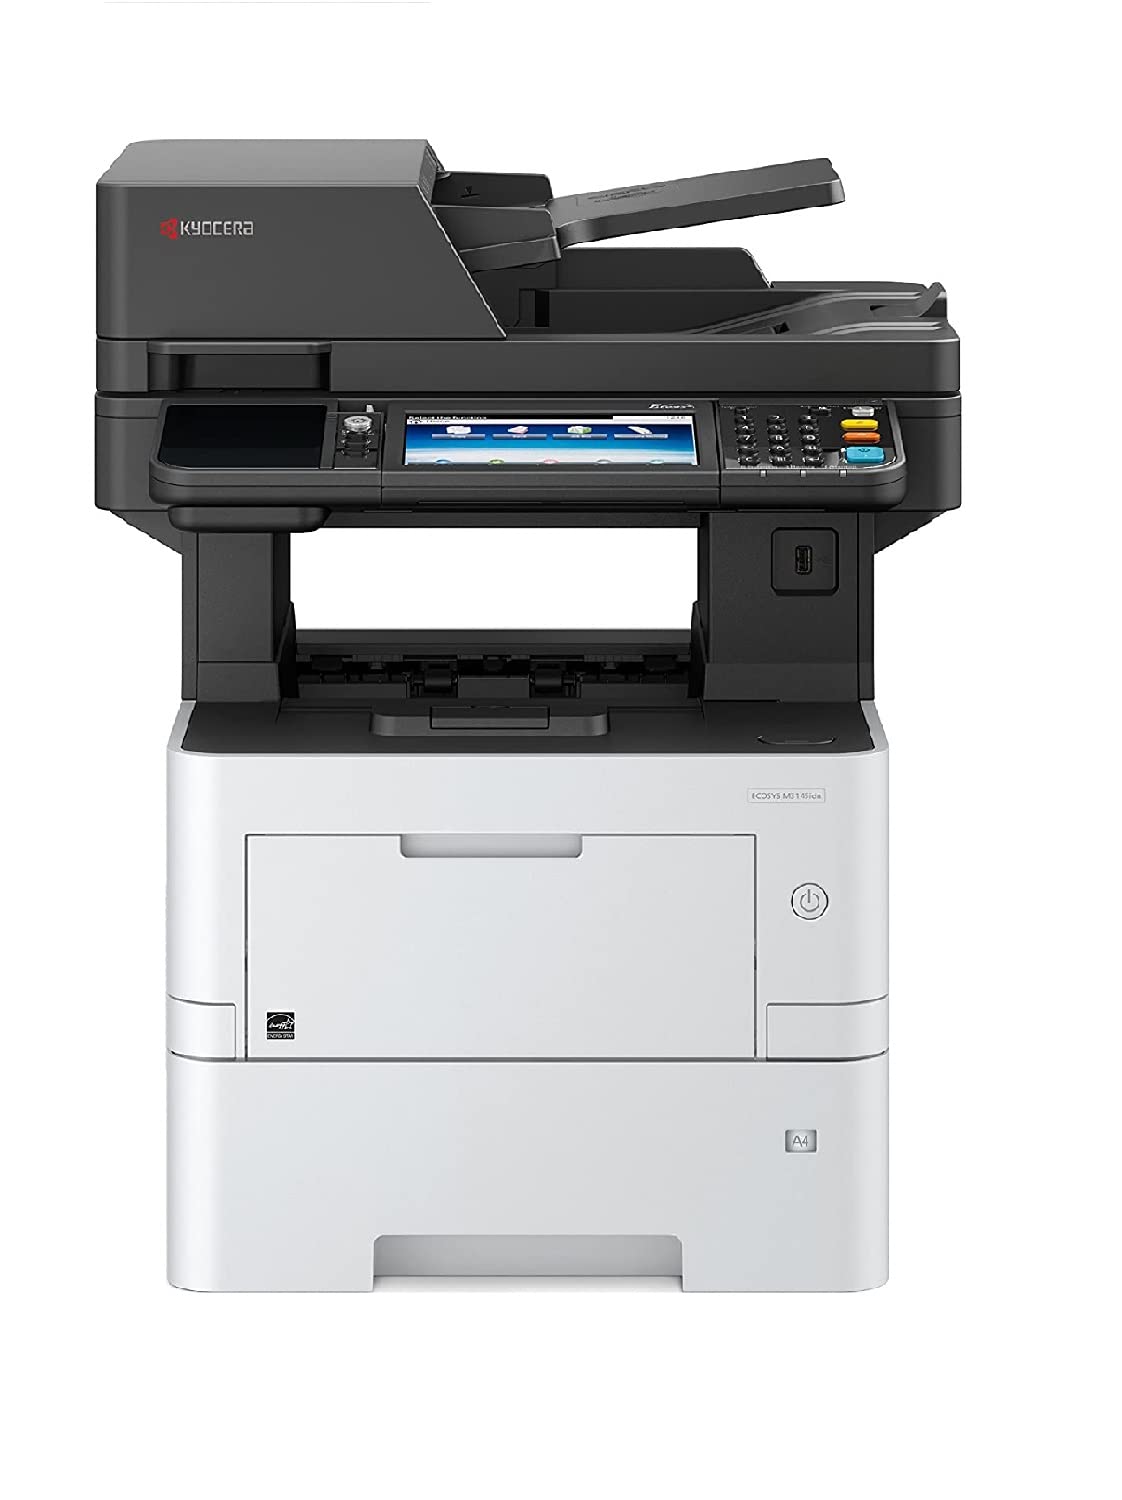 Kyocera 1102V22US0 Ecosys M3145idn B/W Multifunctional Printer, up to 47 PPM, up to Fast 1200 DPI, 150000 Pages Per Month, Mobile Printing Supported, Net Manager Ready